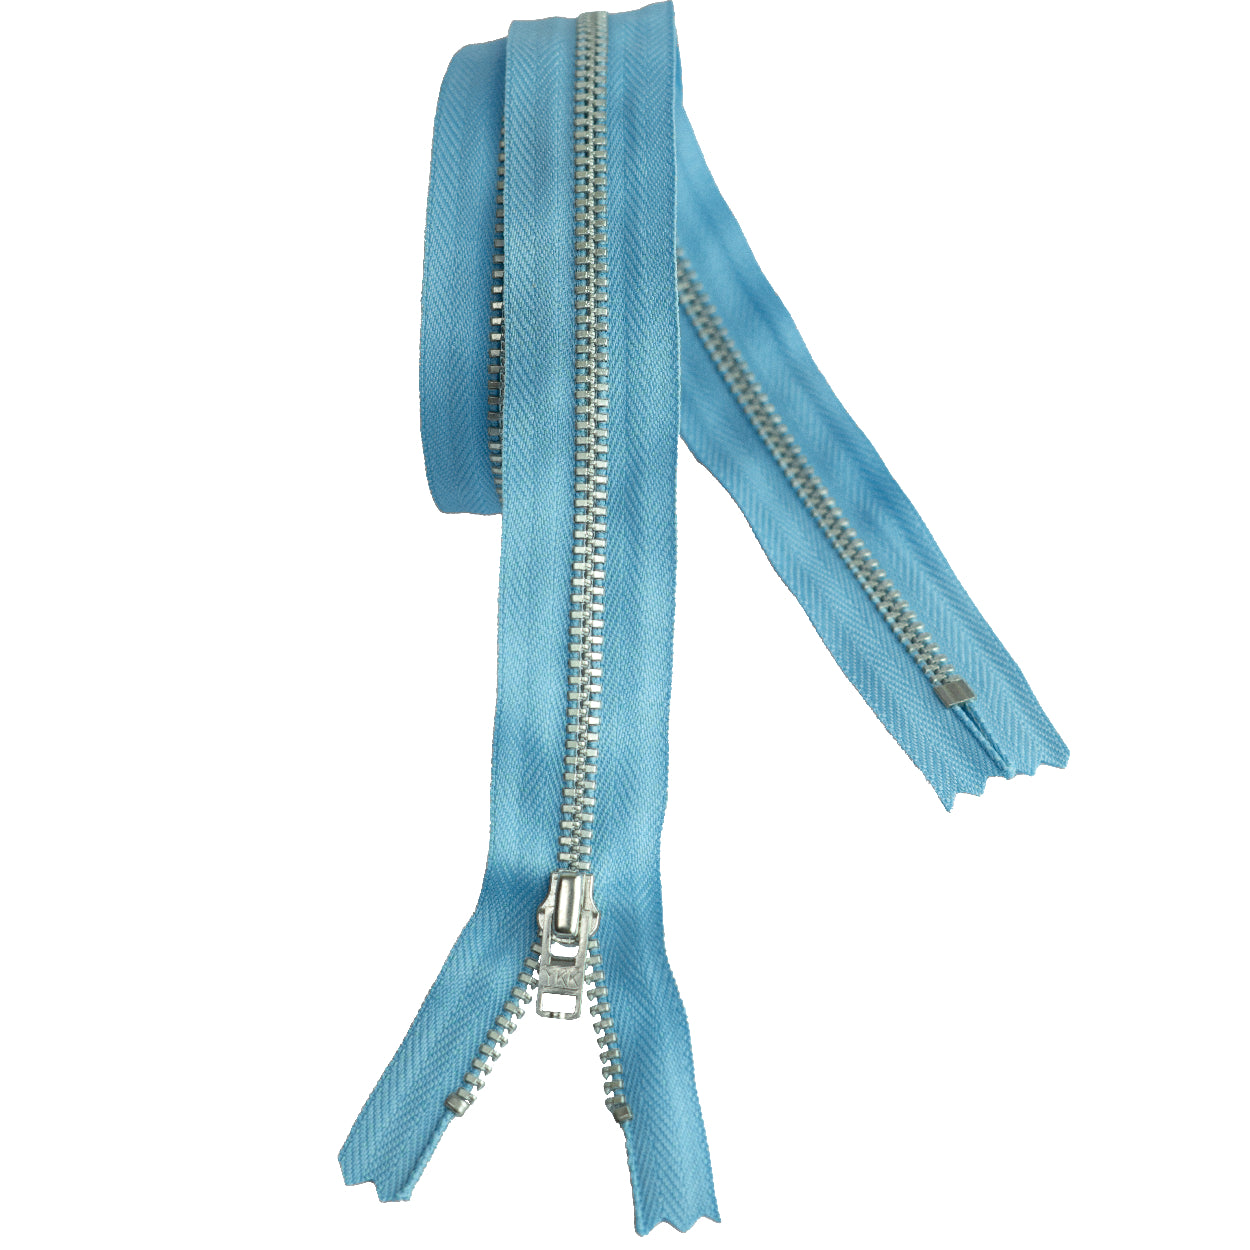 YKK silver tooth Metal Dress Zips - Sky Blue from Jaycotts Sewing Supplies